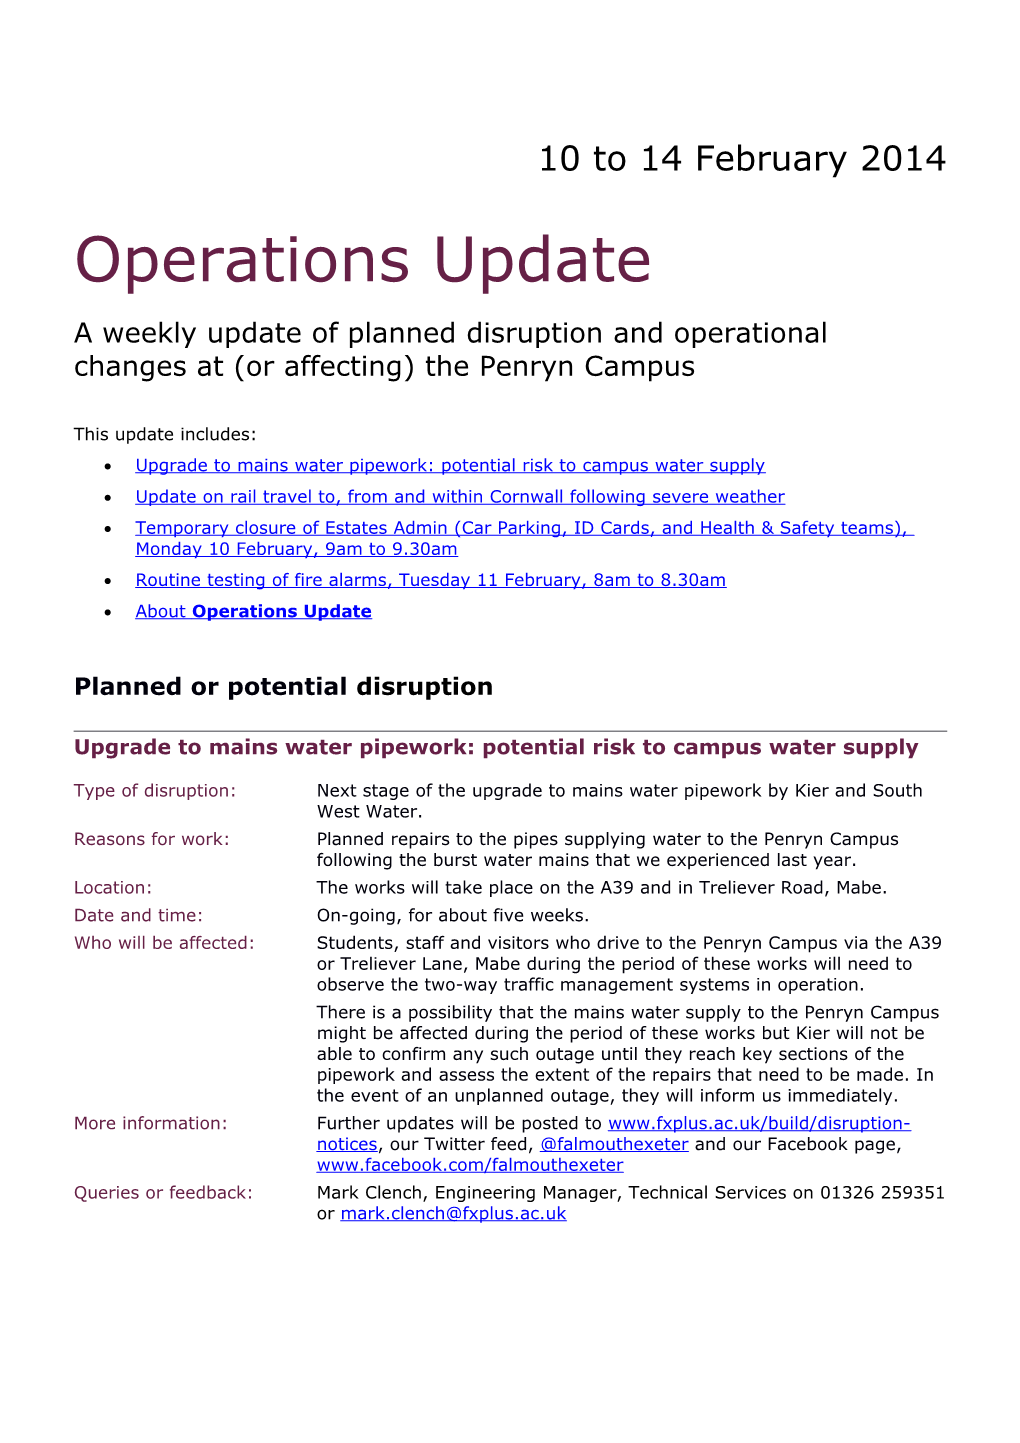 A Weekly Update of Planned Disruption and Operational Changes at (Or Affecting) the Penryn